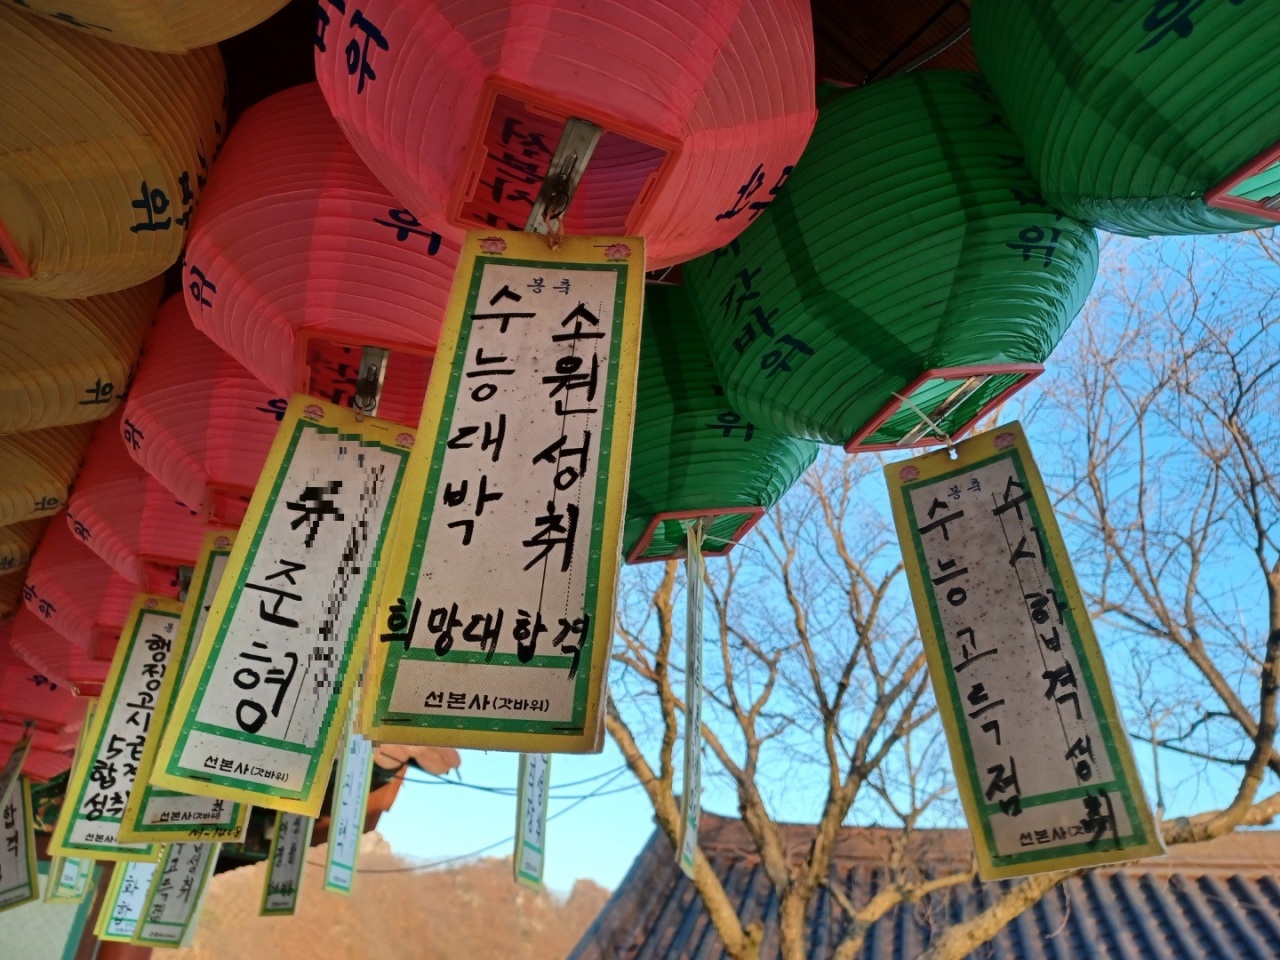 Lanterns hang at the temple Seonbeonsa with messages hoping for an “outstanding Suneung result.” (Lee Si-jin/The Korea Herald)